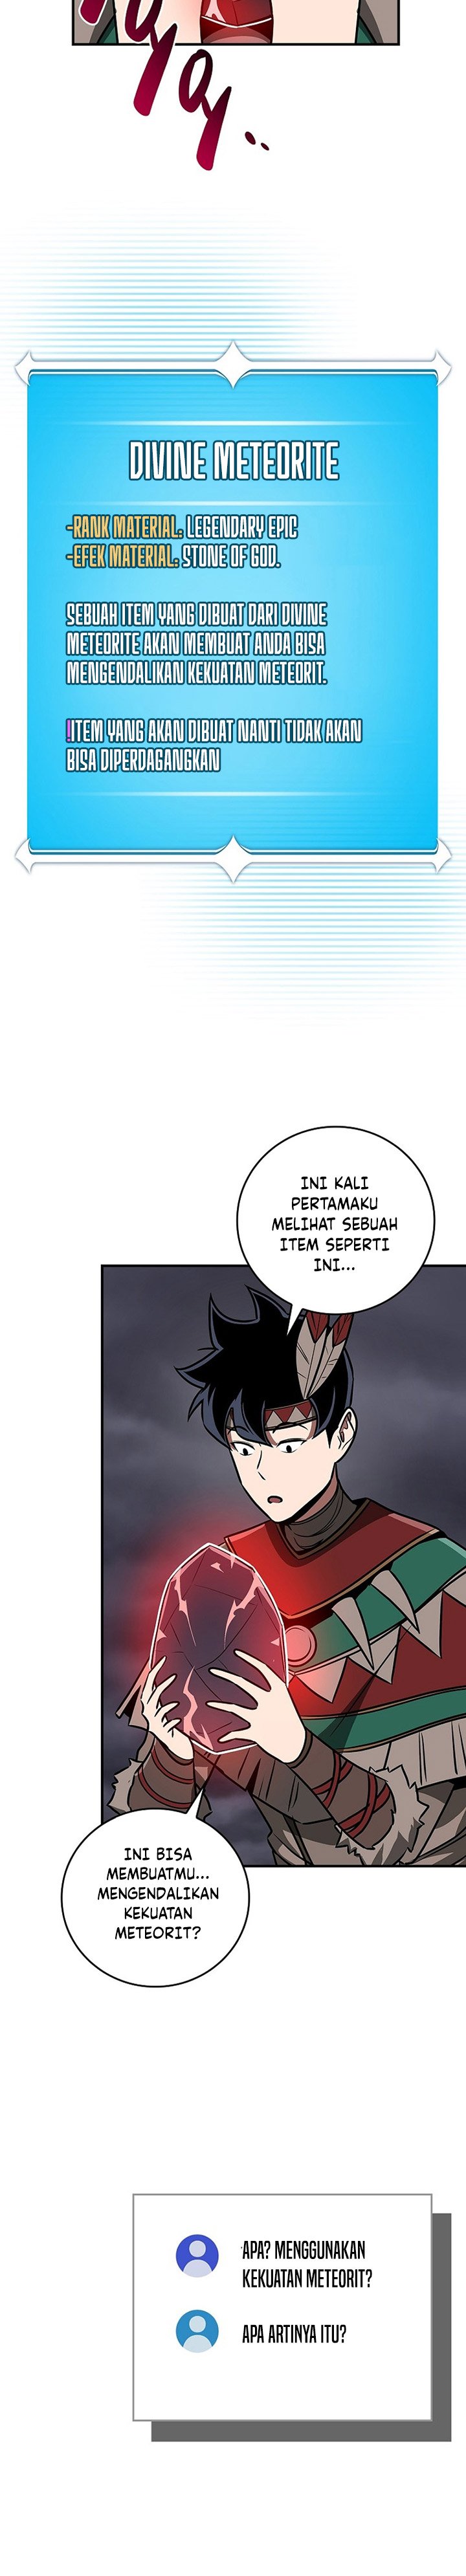 Archmage Streamer Chapter 96 S2 End - 273